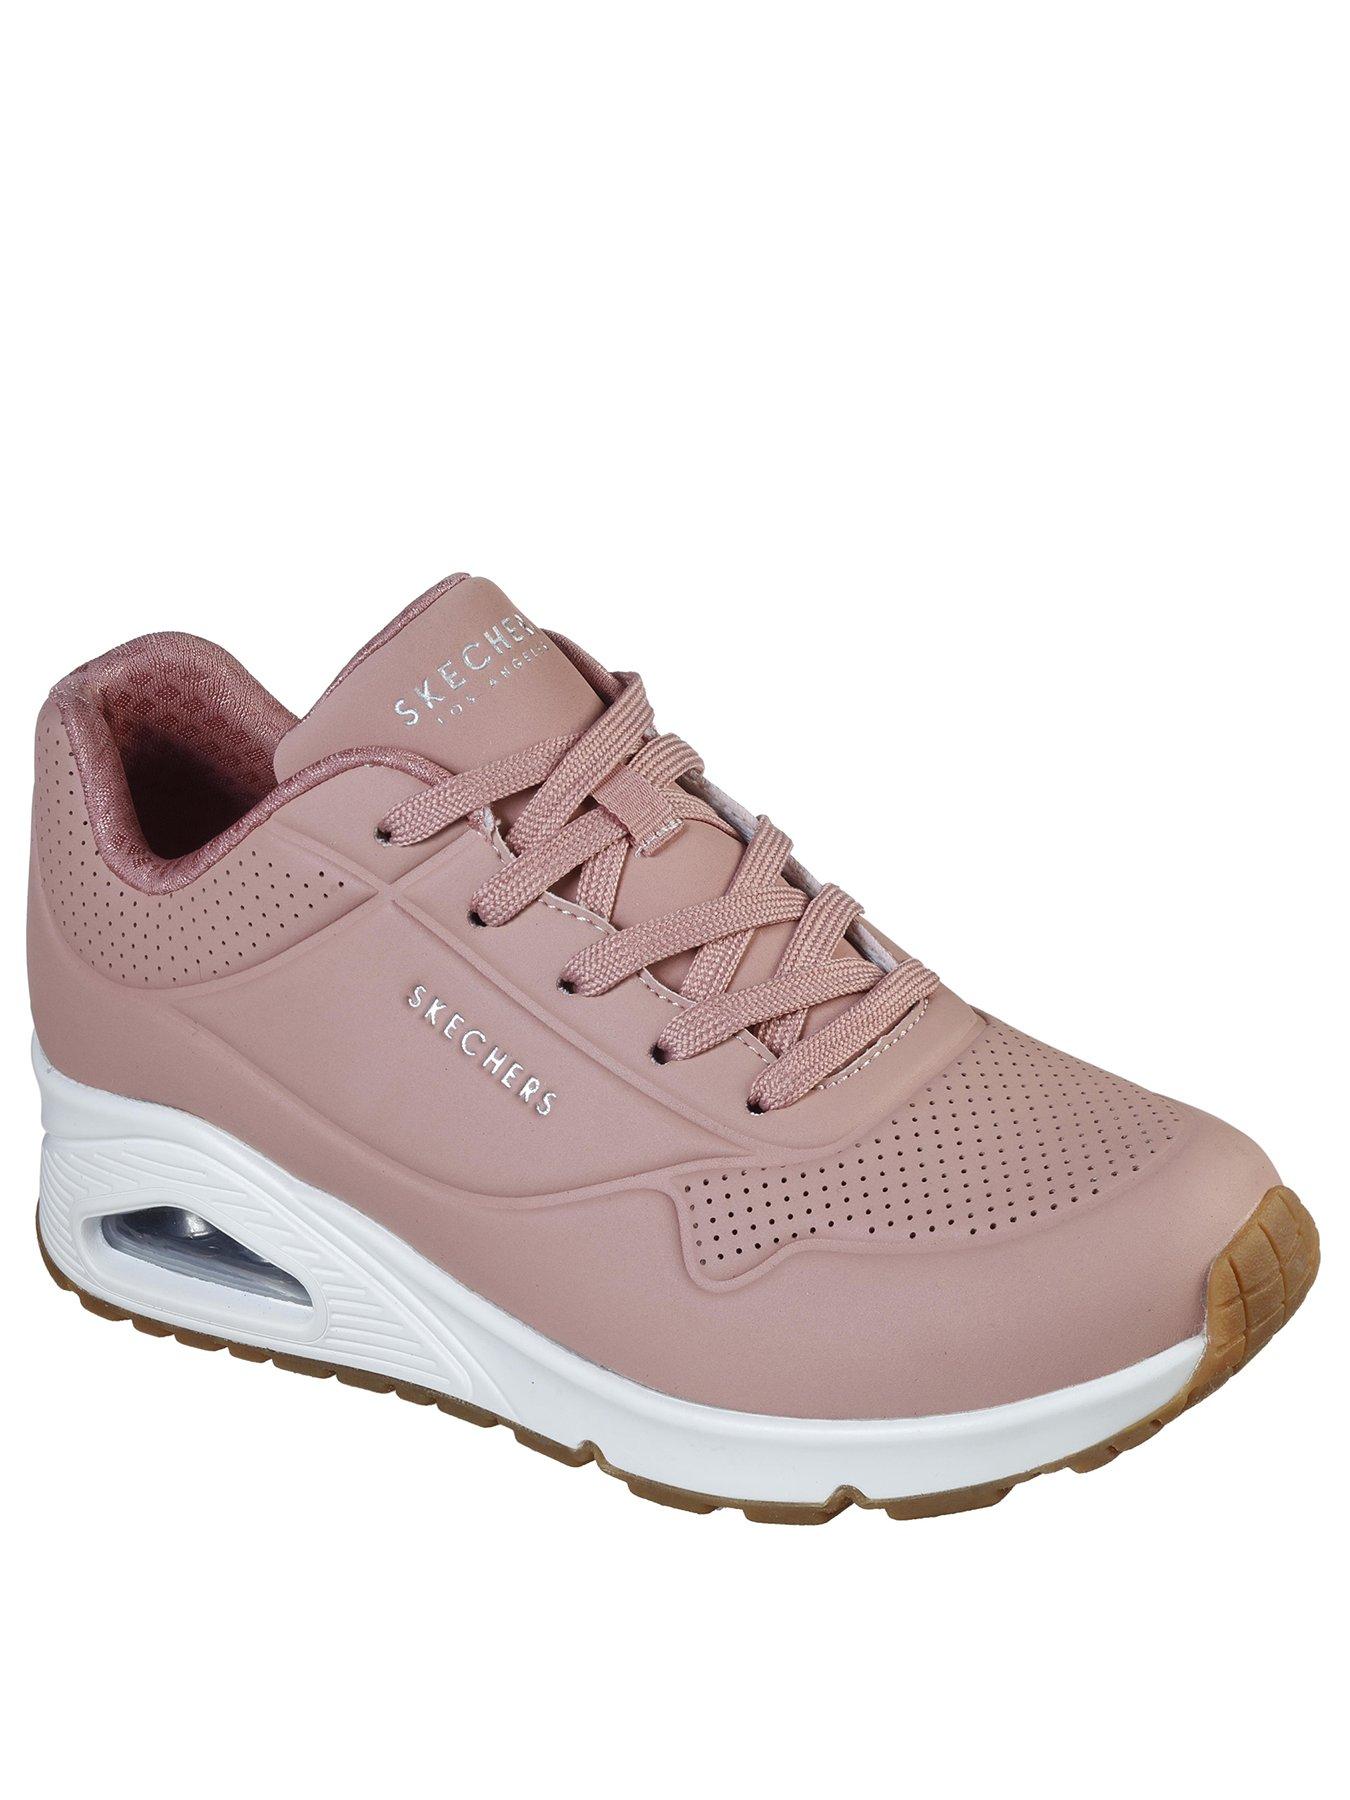 stand on air skechers